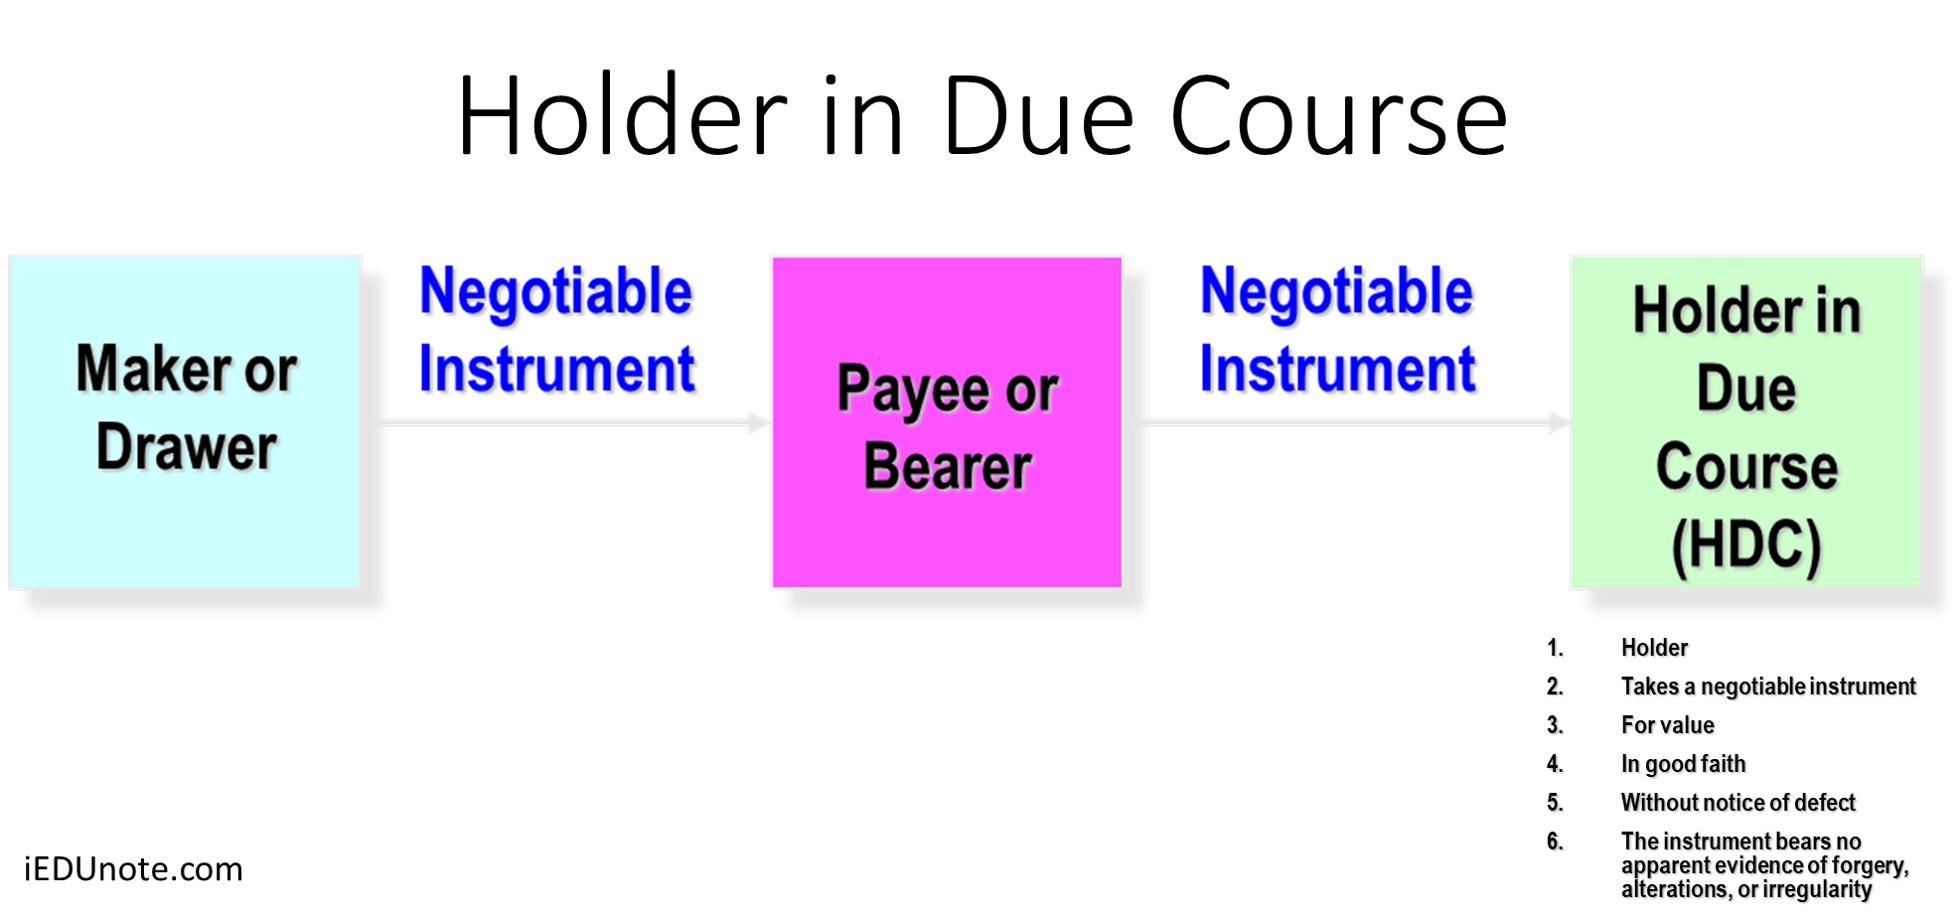 holder in due course